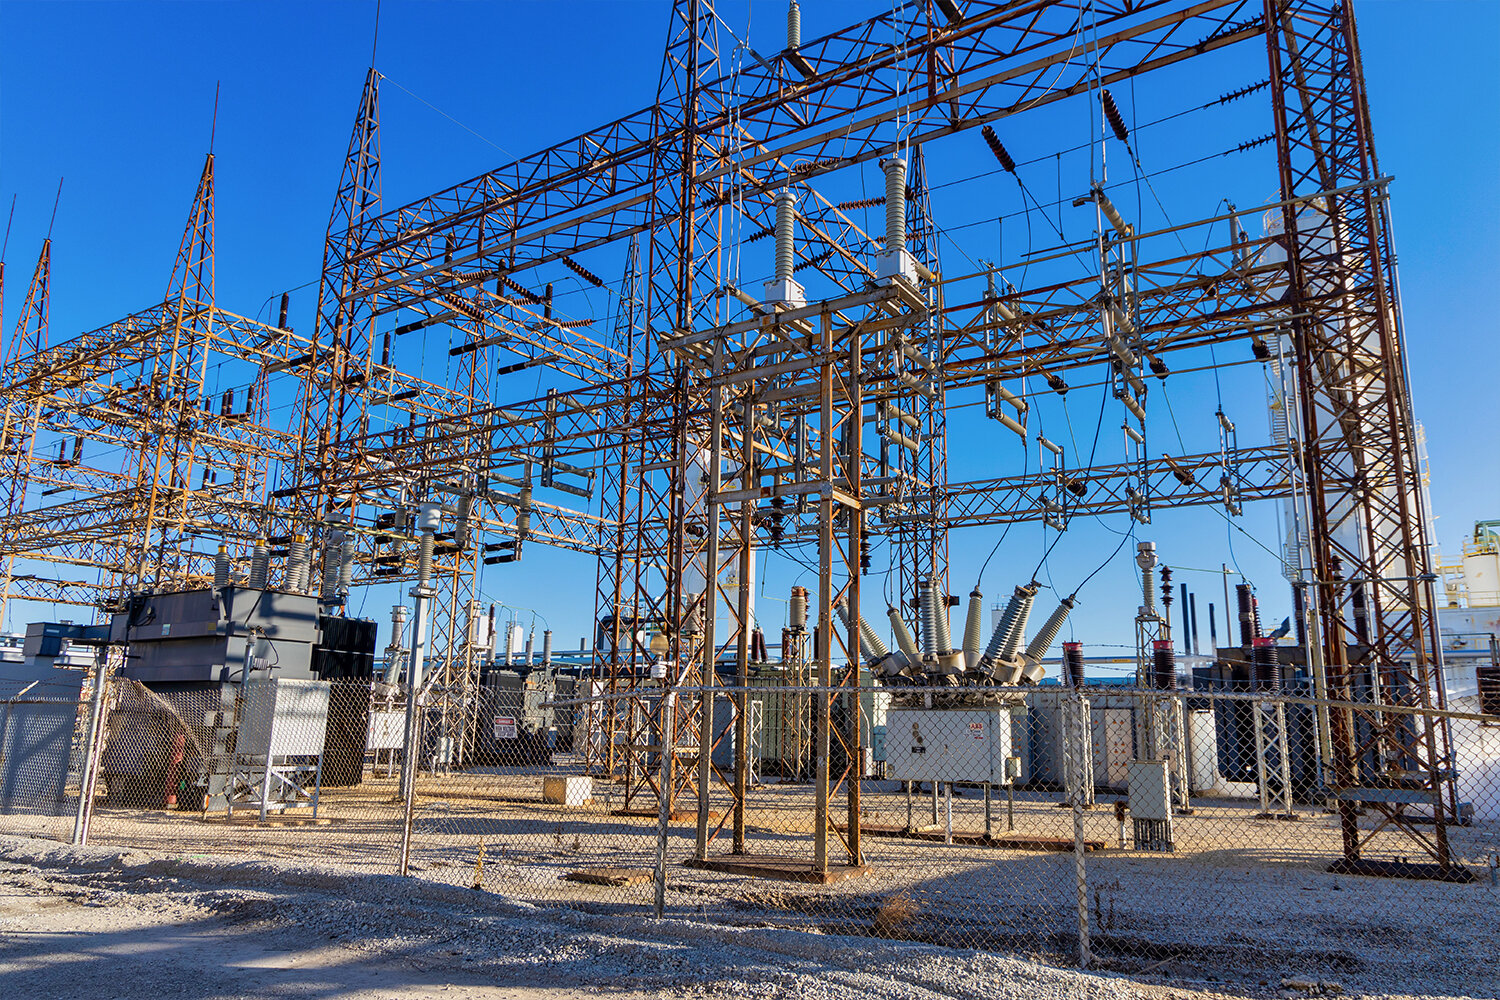 aldridge-electric-top-nationwide-electrical-contractor-utility-power-transmission-distribution-substation-technology.jpg